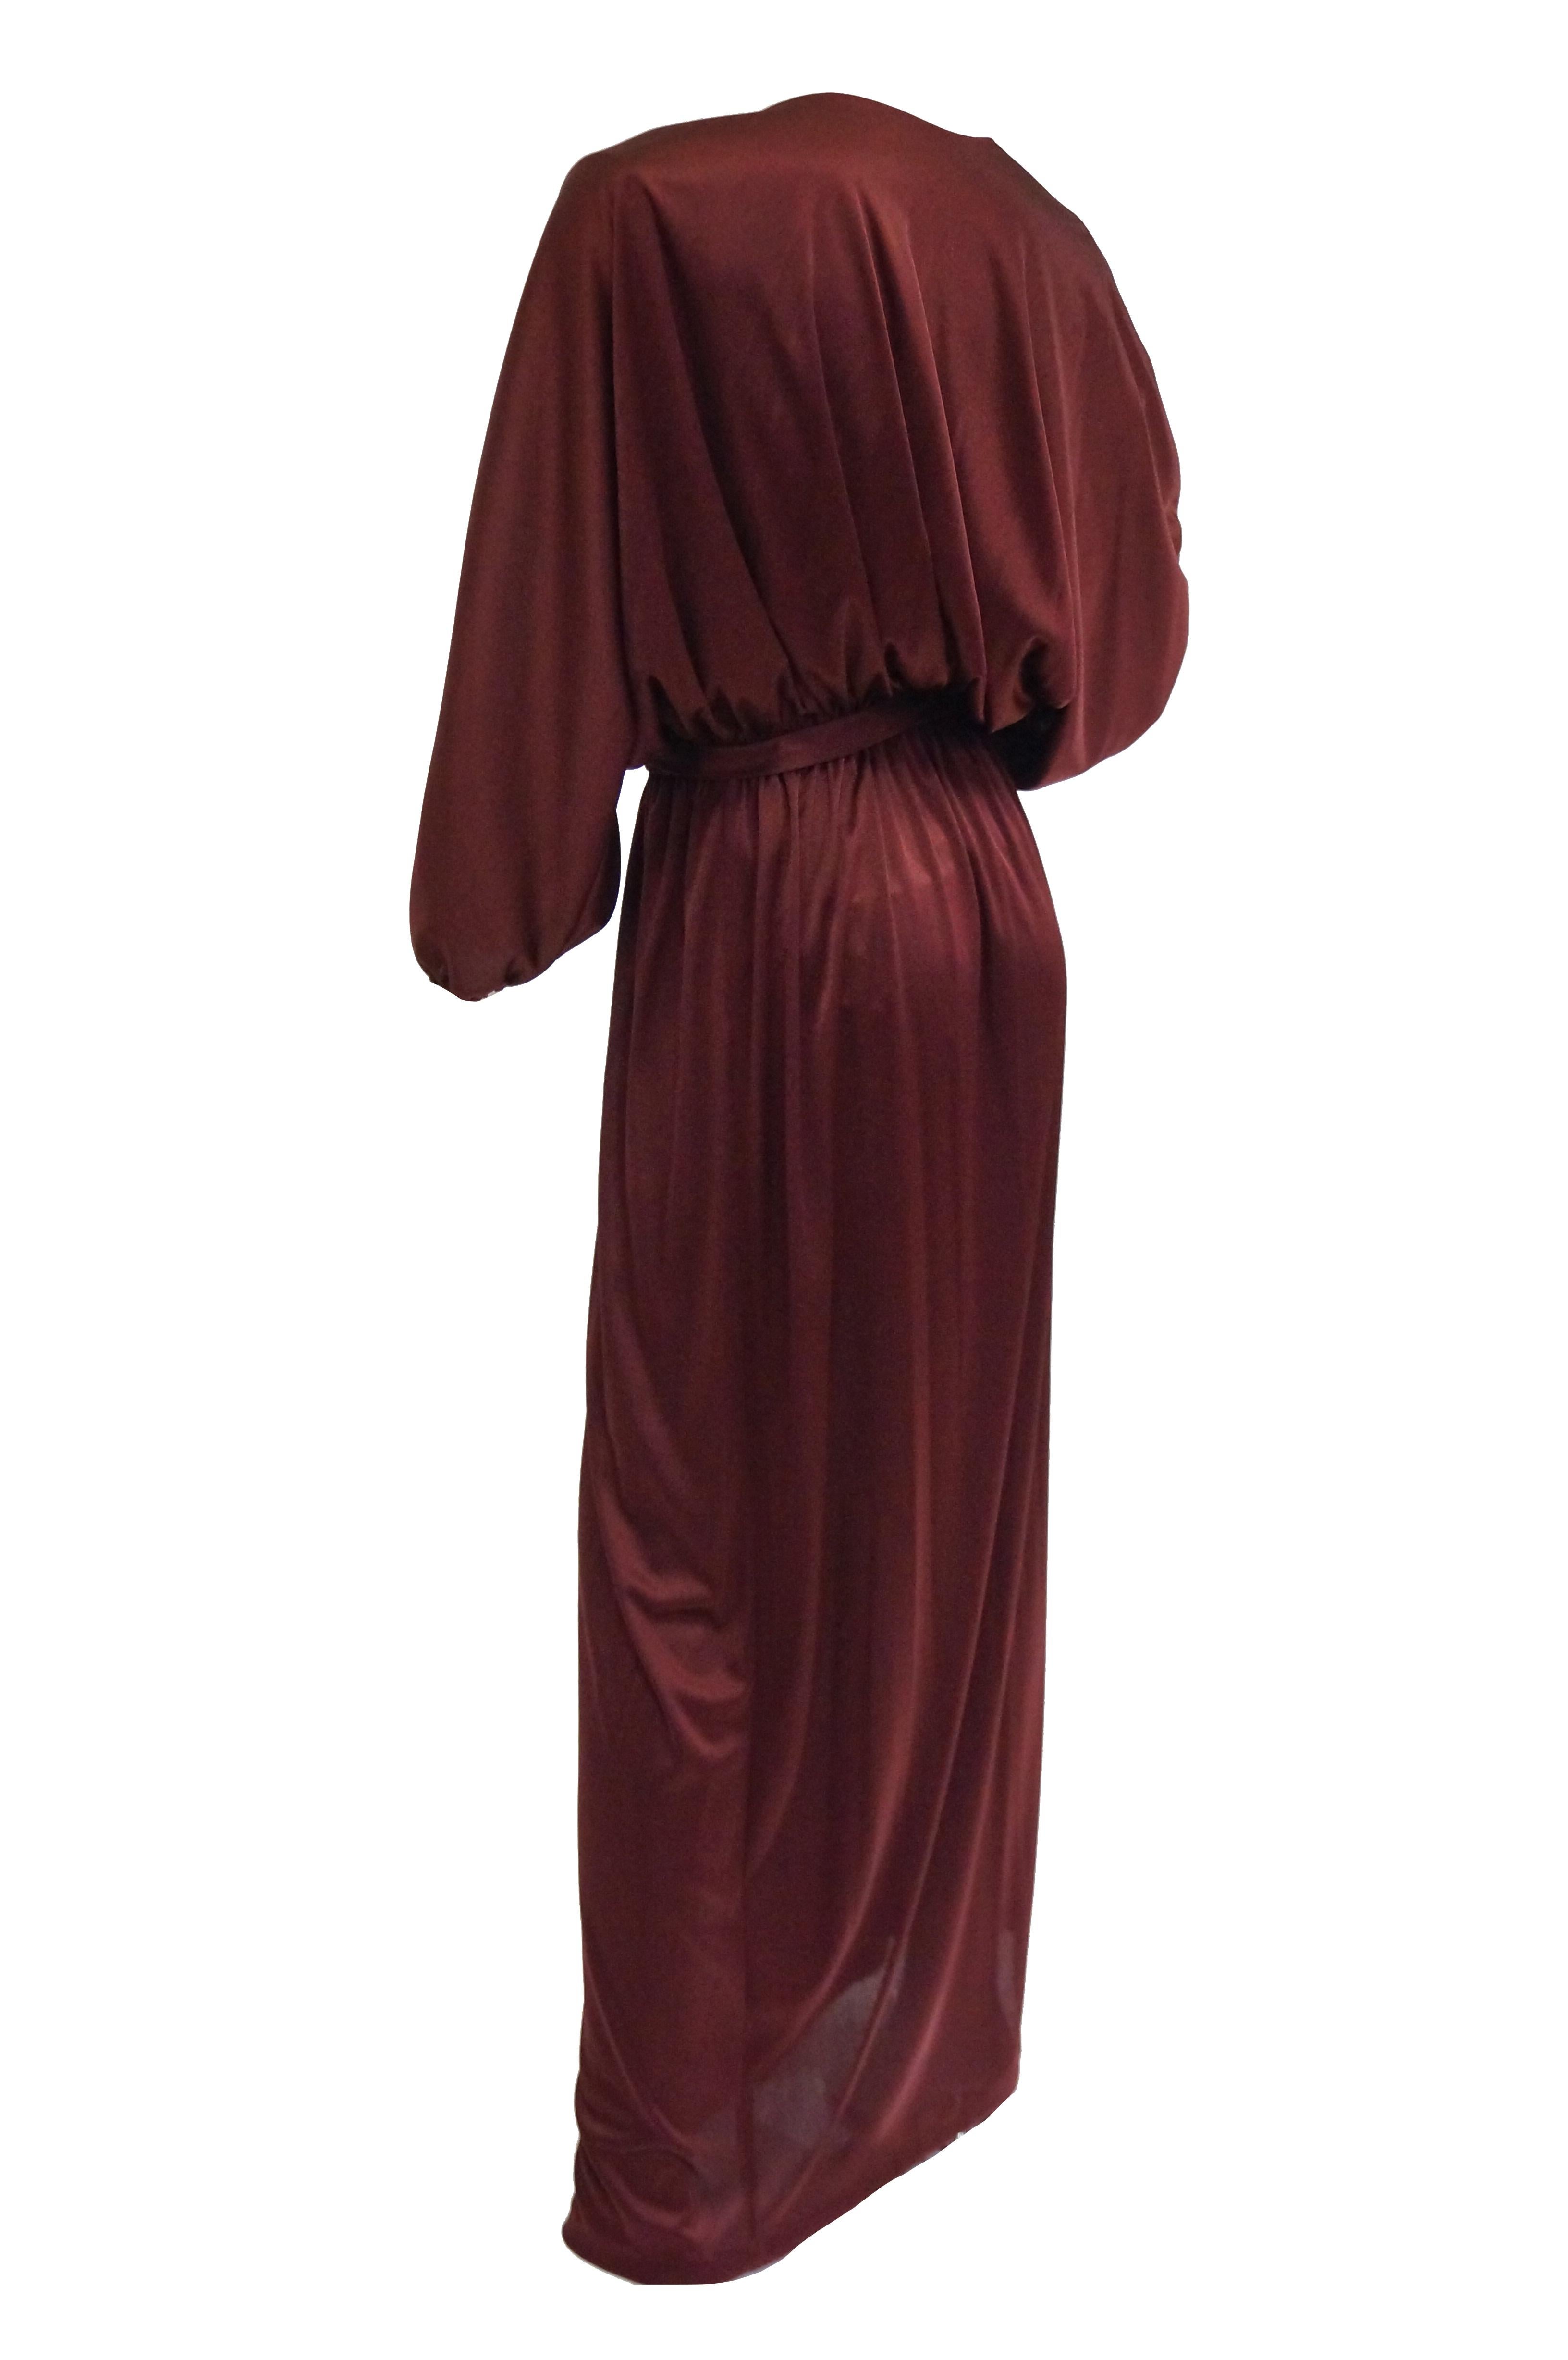 1970s Joy Stevens Tyrian Purple Draped Knit Evening Dress with Jacket In Excellent Condition For Sale In Houston, TX